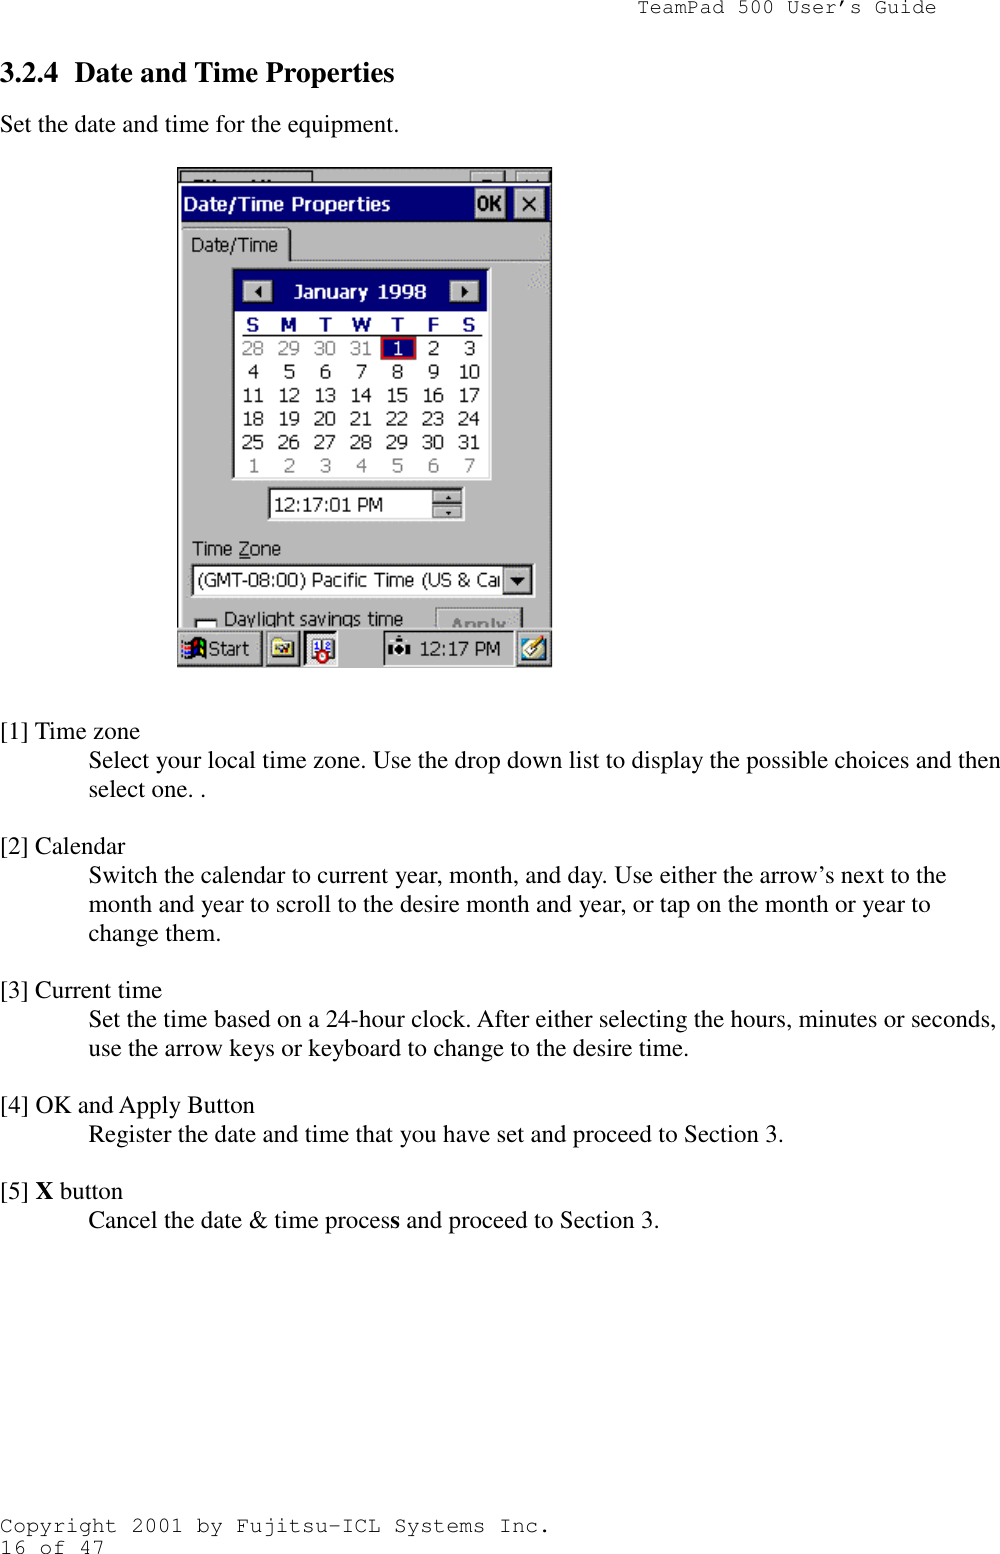                TeamPad 500 User’s GuideCopyright 2001 by Fujitsu-ICL Systems Inc.16 of 473.2.4 Date and Time PropertiesSet the date and time for the equipment.[1] Time zoneSelect your local time zone. Use the drop down list to display the possible choices and thenselect one. .[2] CalendarSwitch the calendar to current year, month, and day. Use either the arrow’s next to themonth and year to scroll to the desire month and year, or tap on the month or year tochange them.[3] Current timeSet the time based on a 24-hour clock. After either selecting the hours, minutes or seconds,use the arrow keys or keyboard to change to the desire time.[4] OK and Apply ButtonRegister the date and time that you have set and proceed to Section 3.[5] X buttonCancel the date &amp; time process and proceed to Section 3.